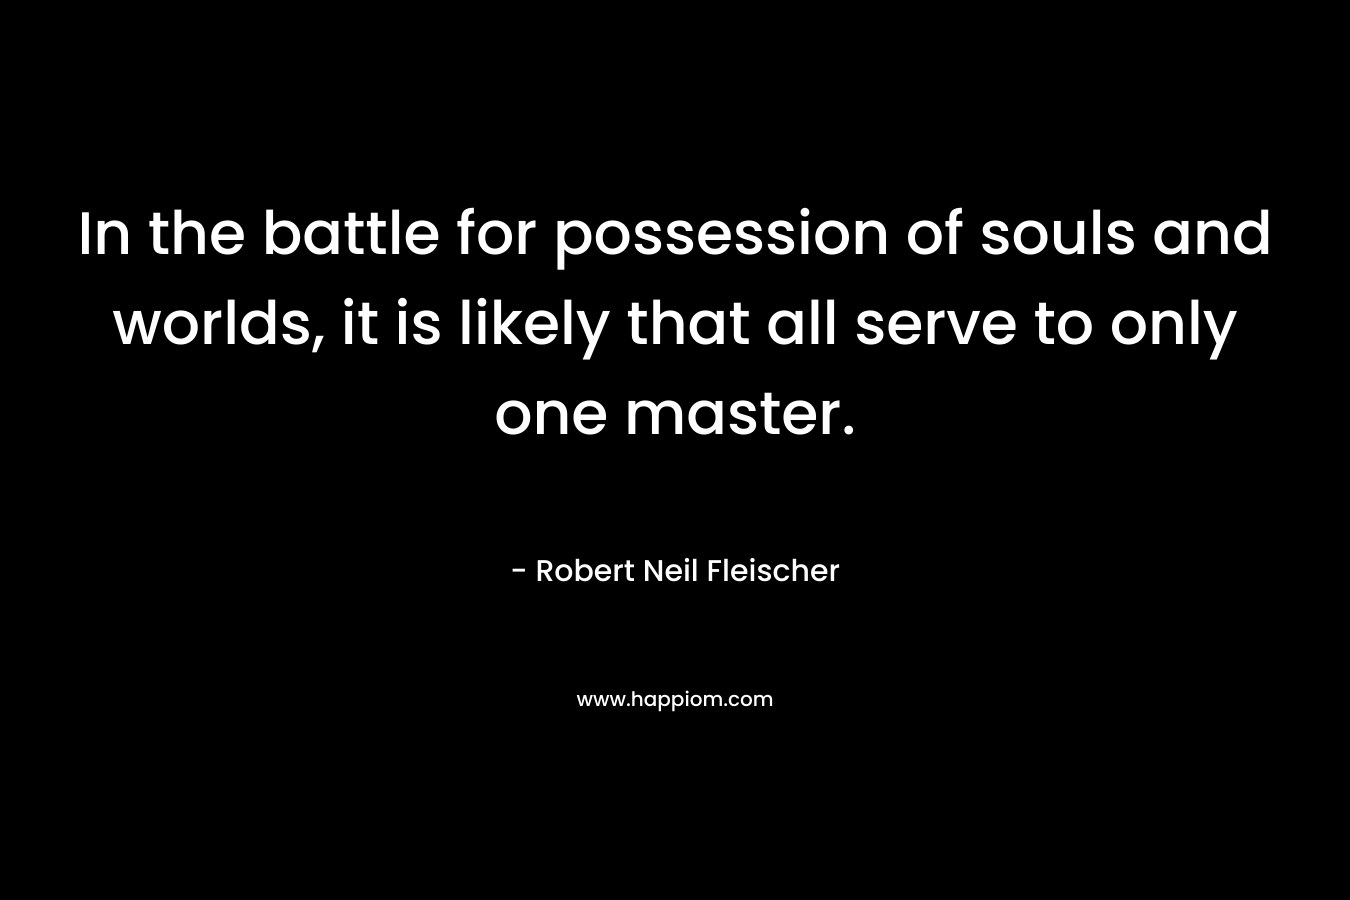 In the battle for possession of souls and worlds, it is likely that all serve to only one master. – Robert Neil Fleischer